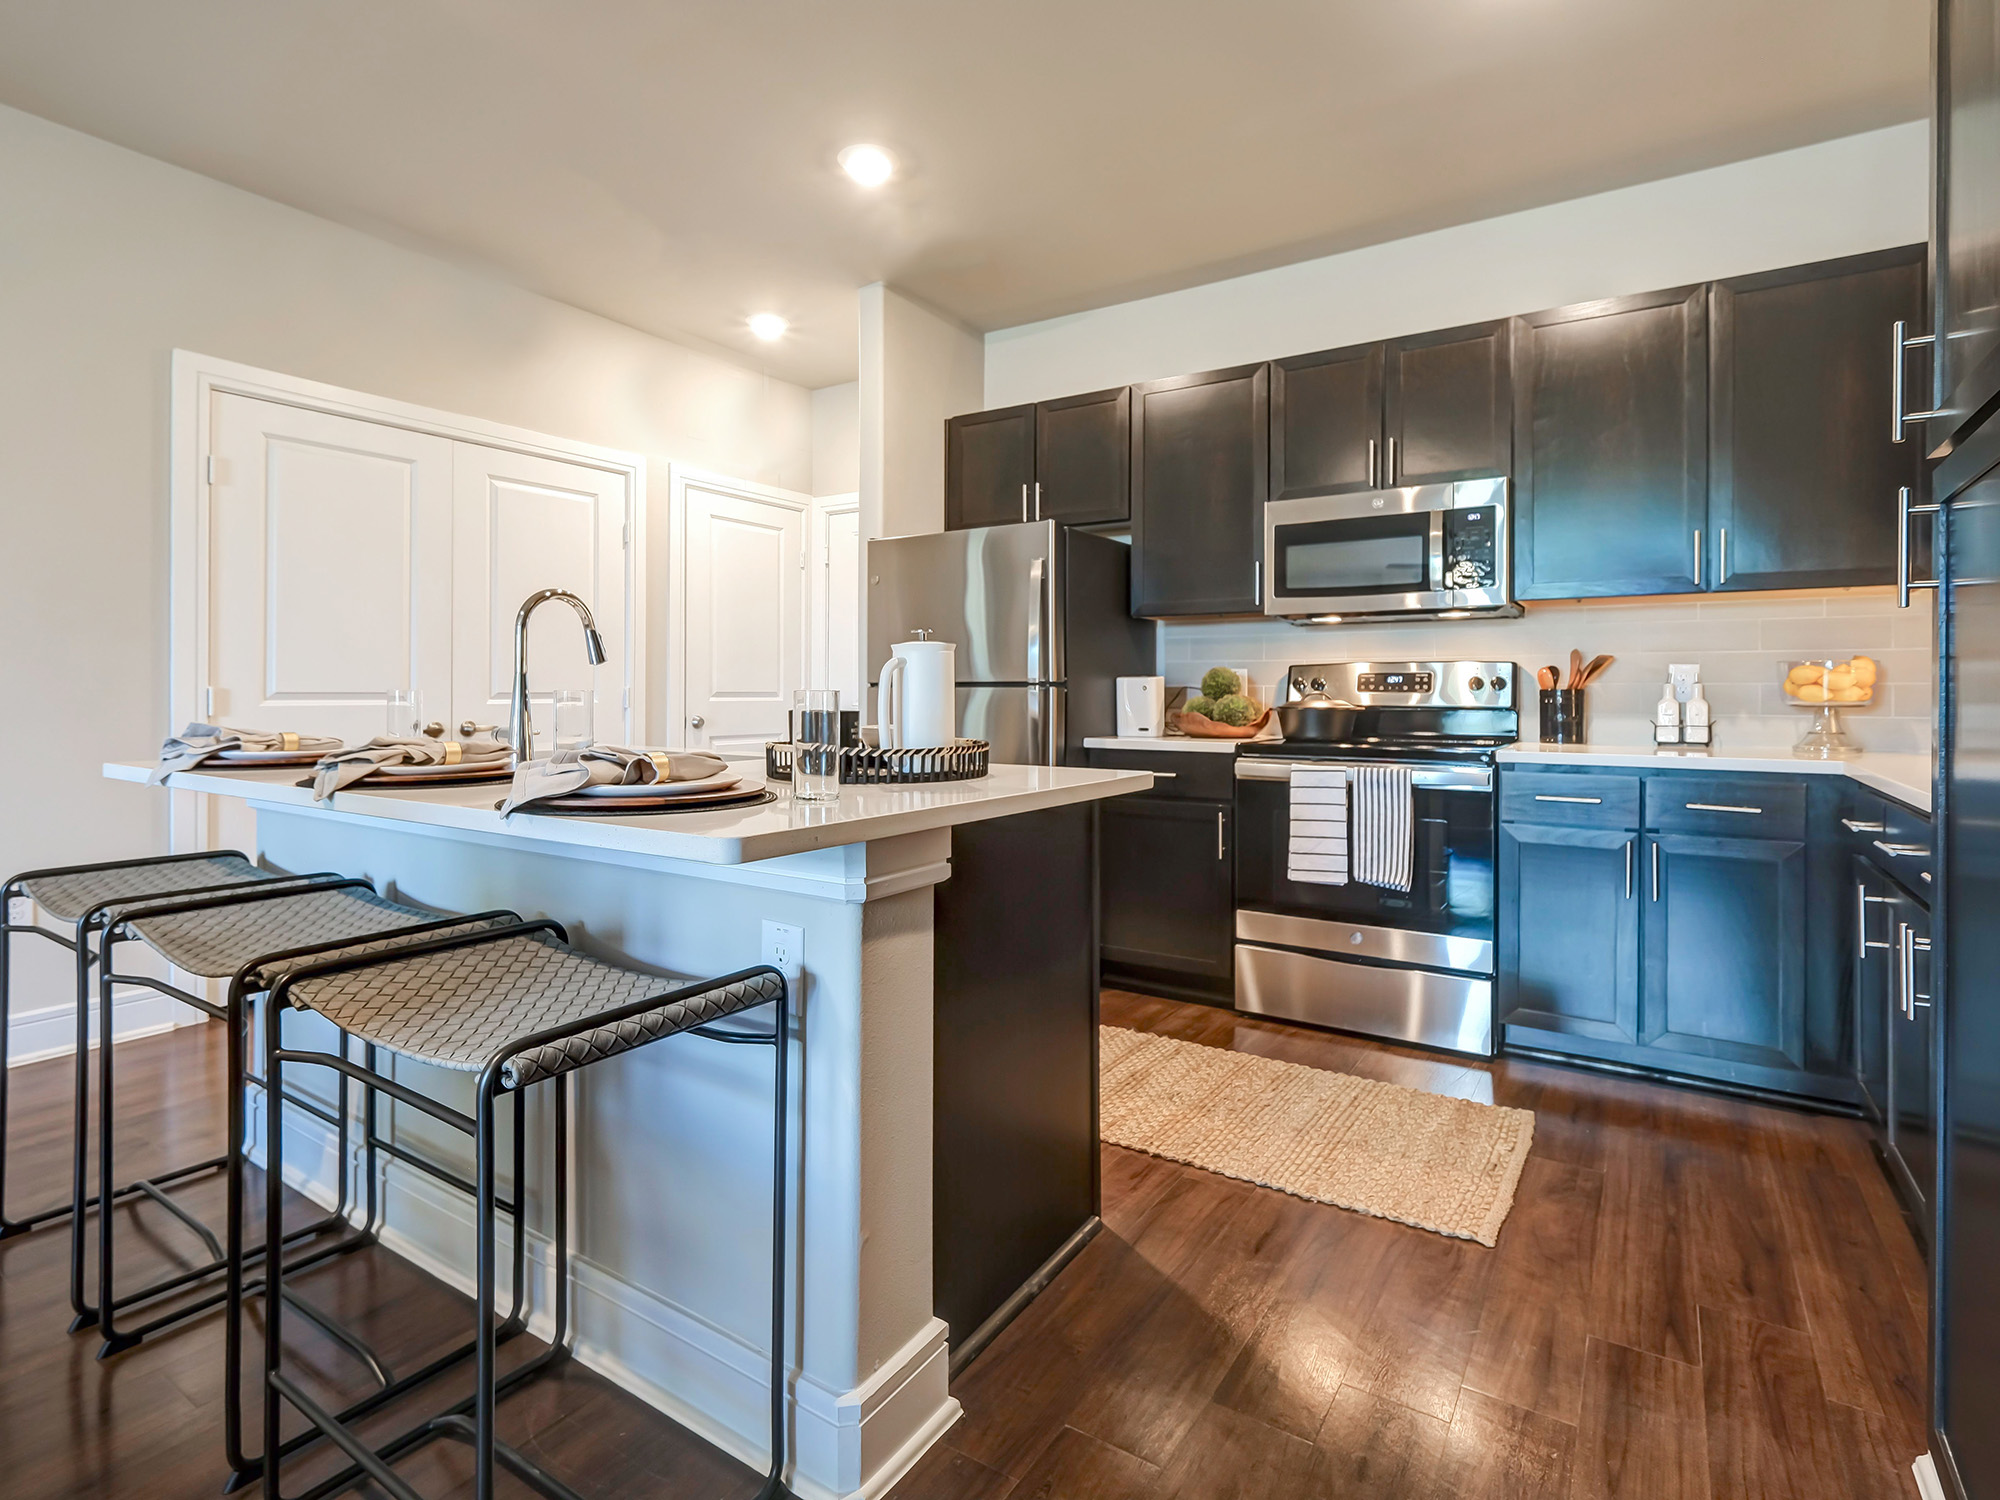 Furnished kitchen with counter and bar stool seating at AVE Las Colinas apartment community. 